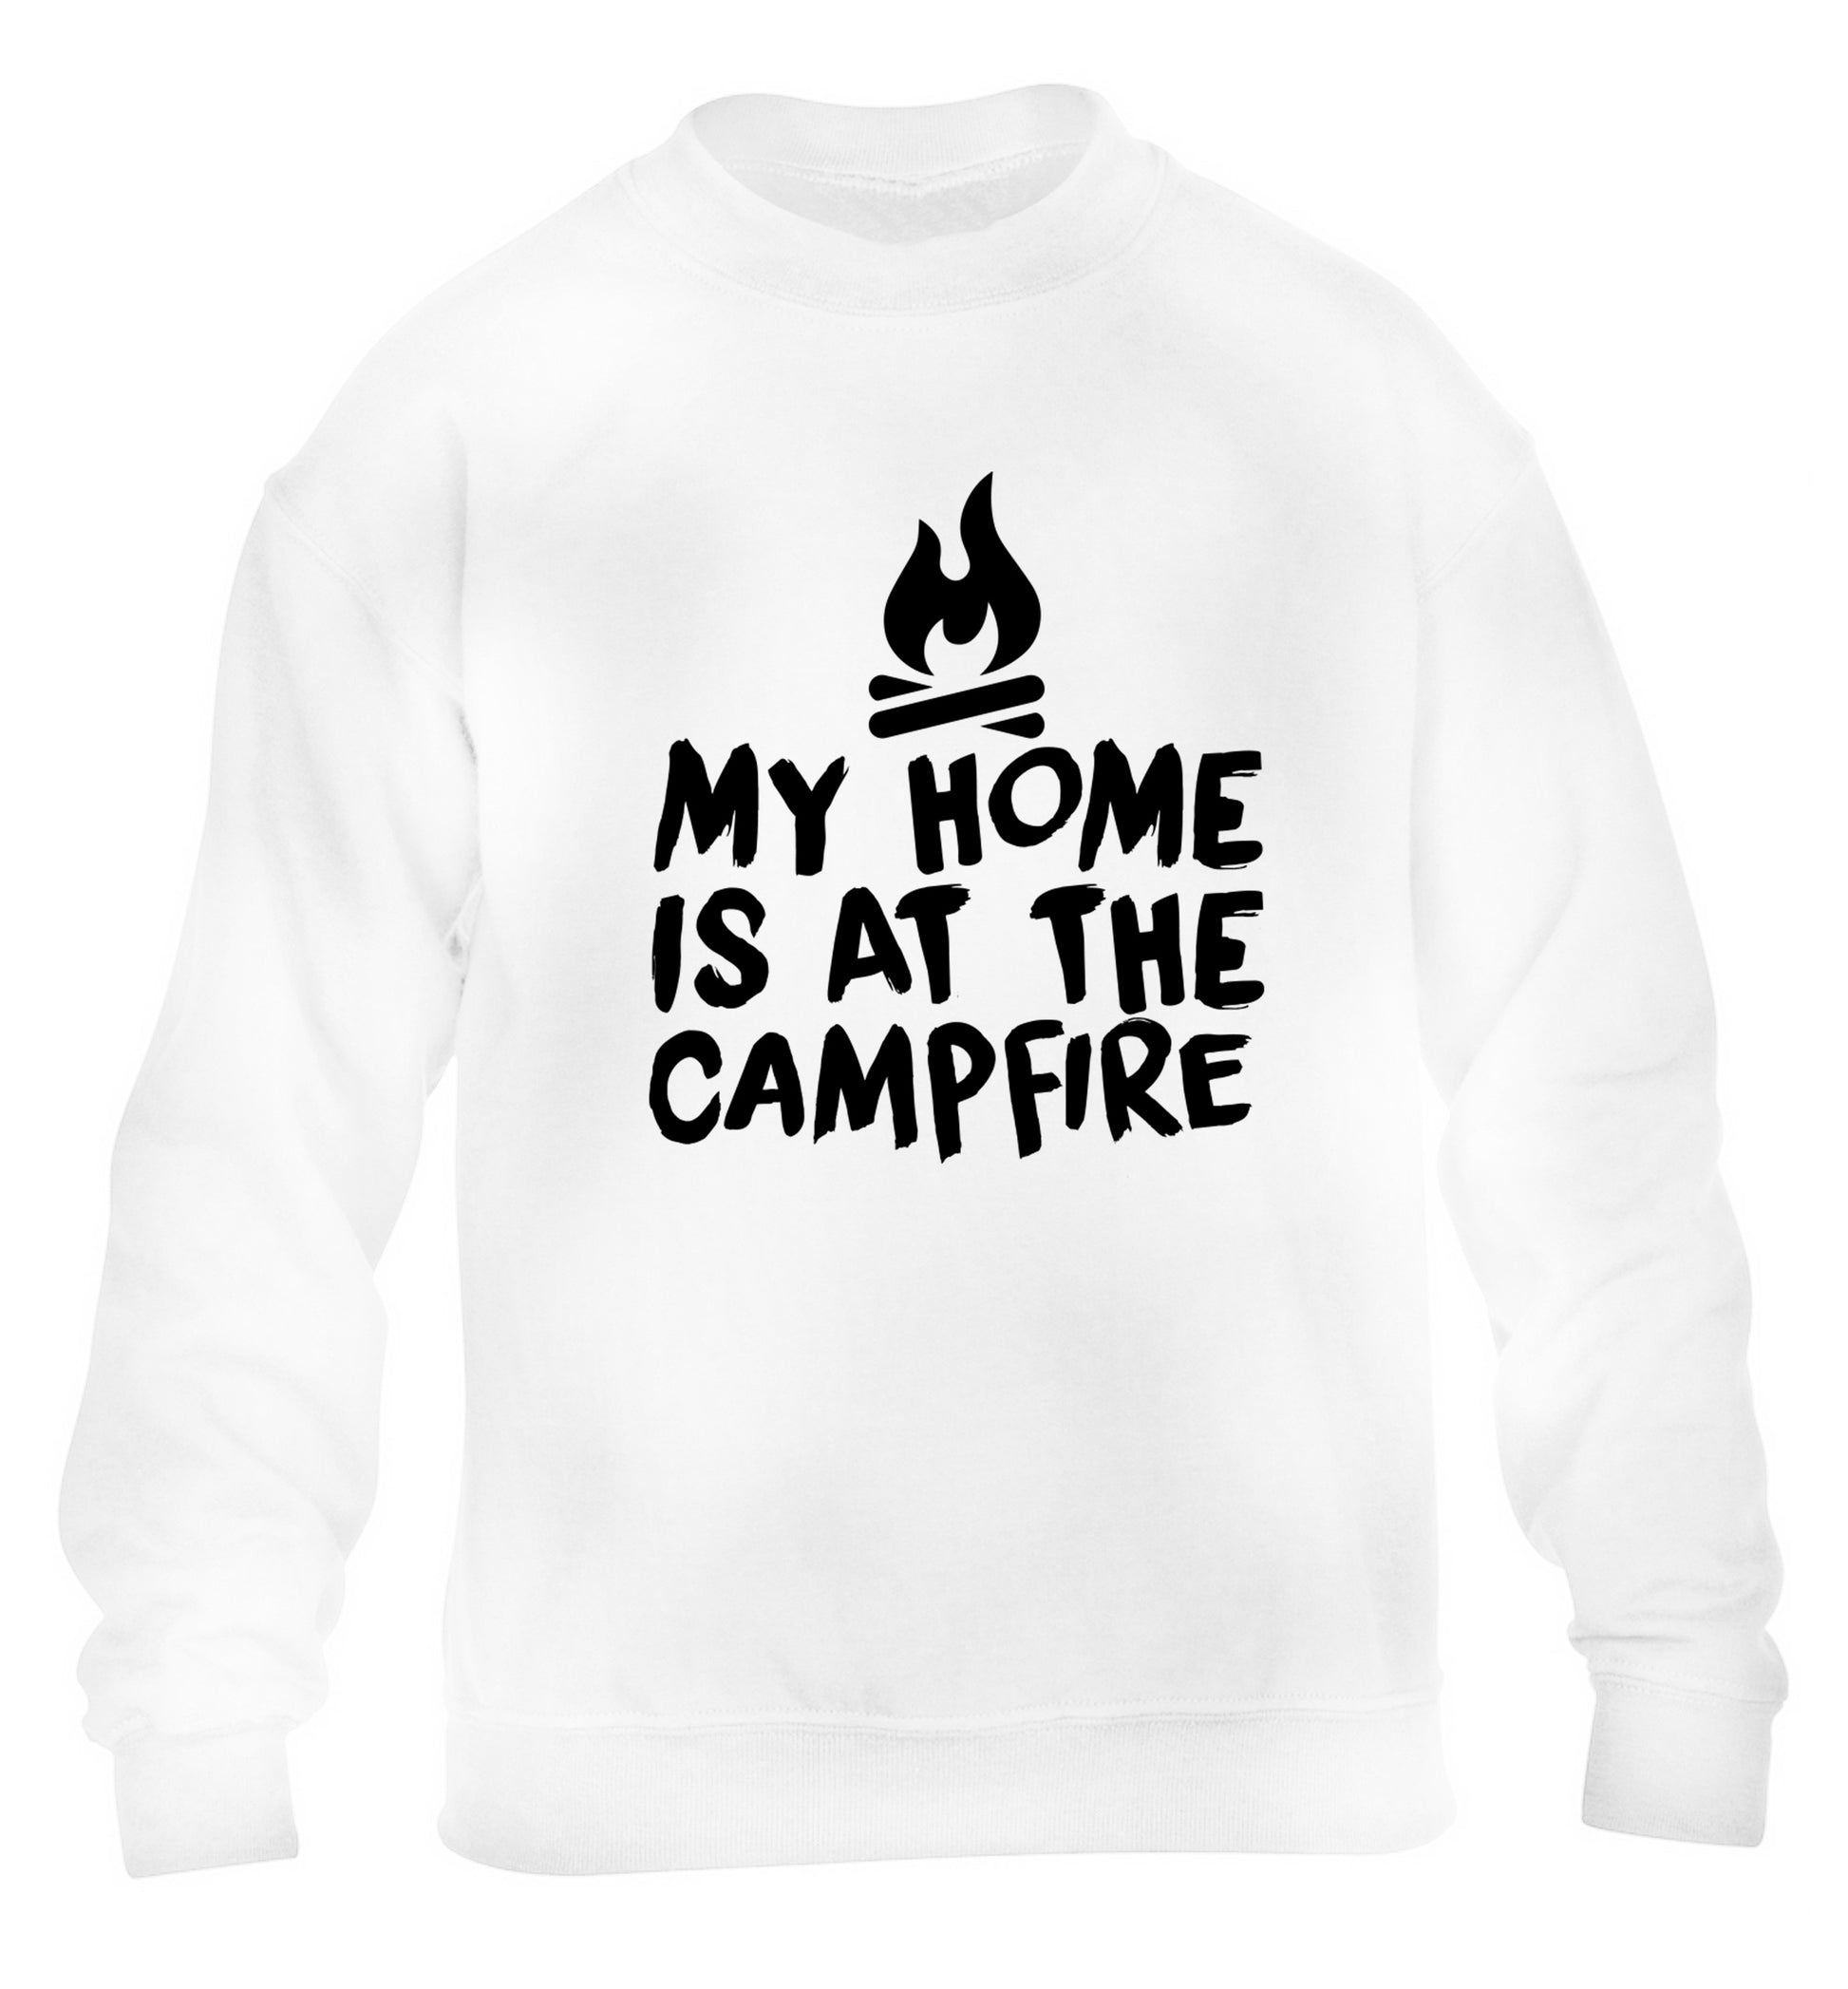 My home is at the campfire children's white sweater 12-14 Years